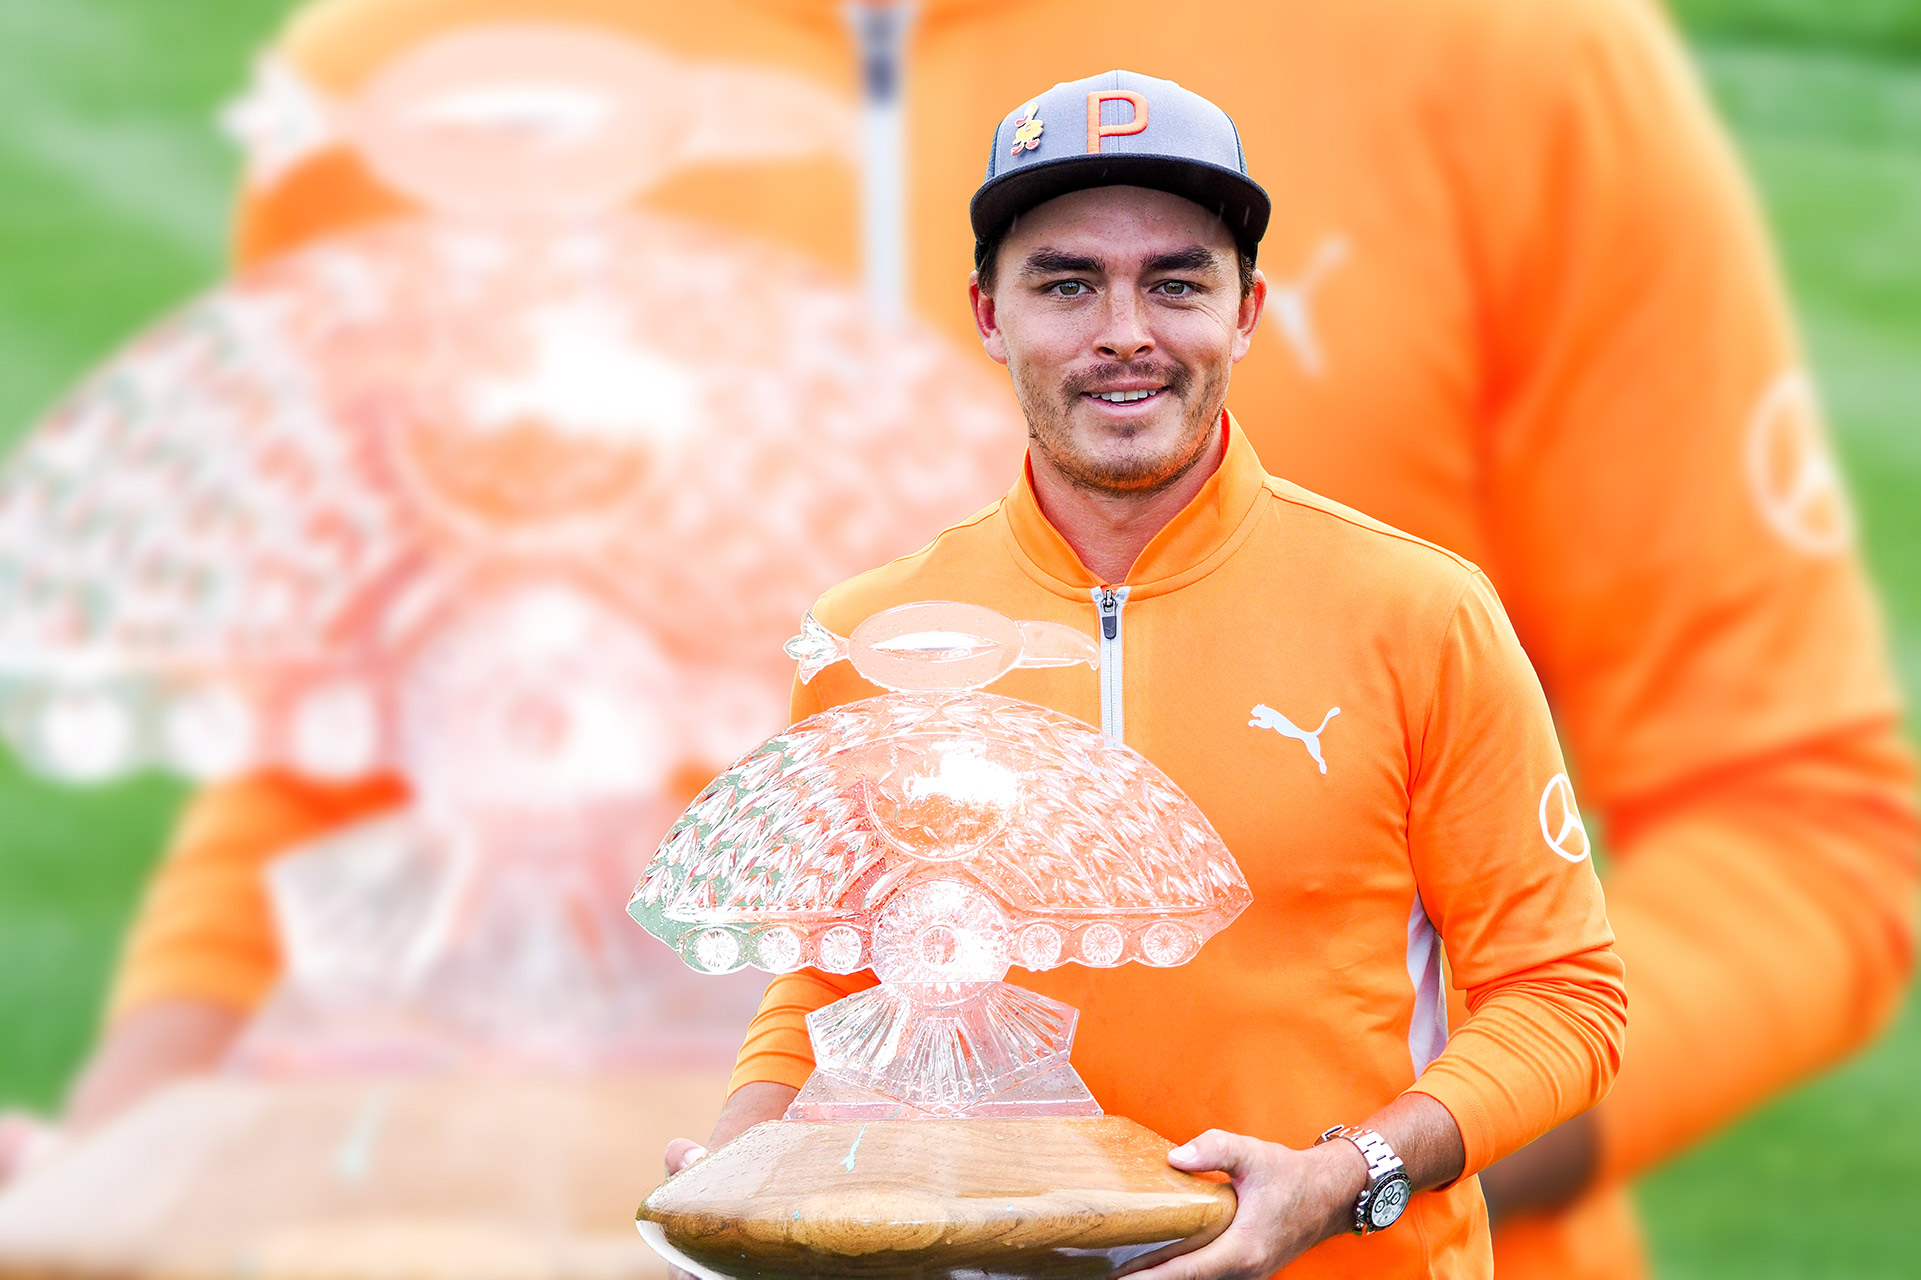 Rickie Fowler EXCLUSIVE: I want a multiple win season with a major!